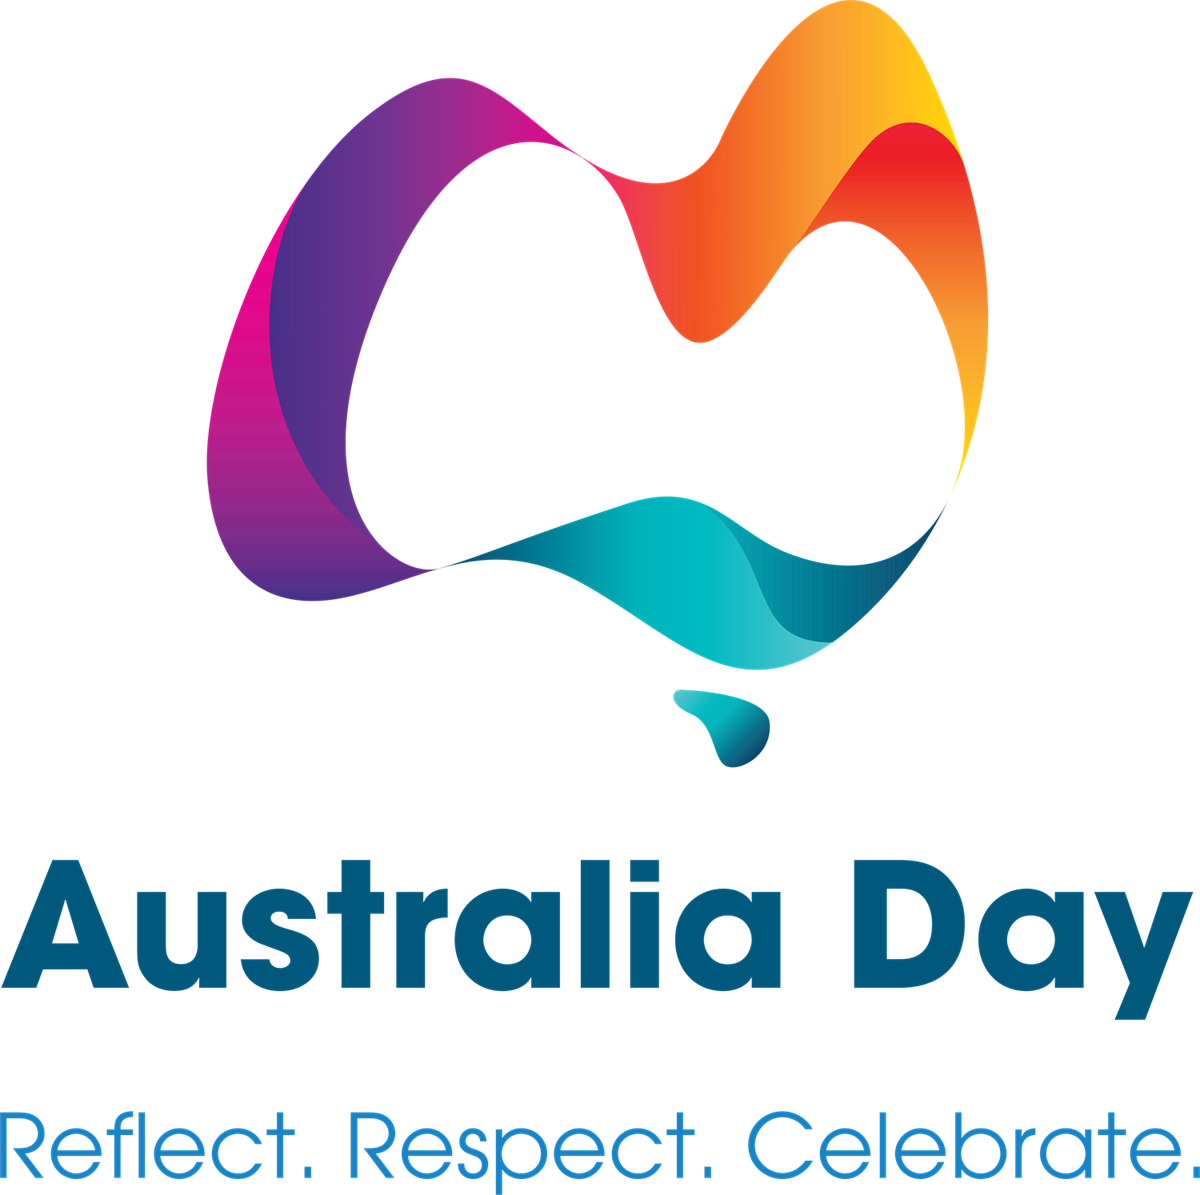 Nominations Open For Australia Day Awards